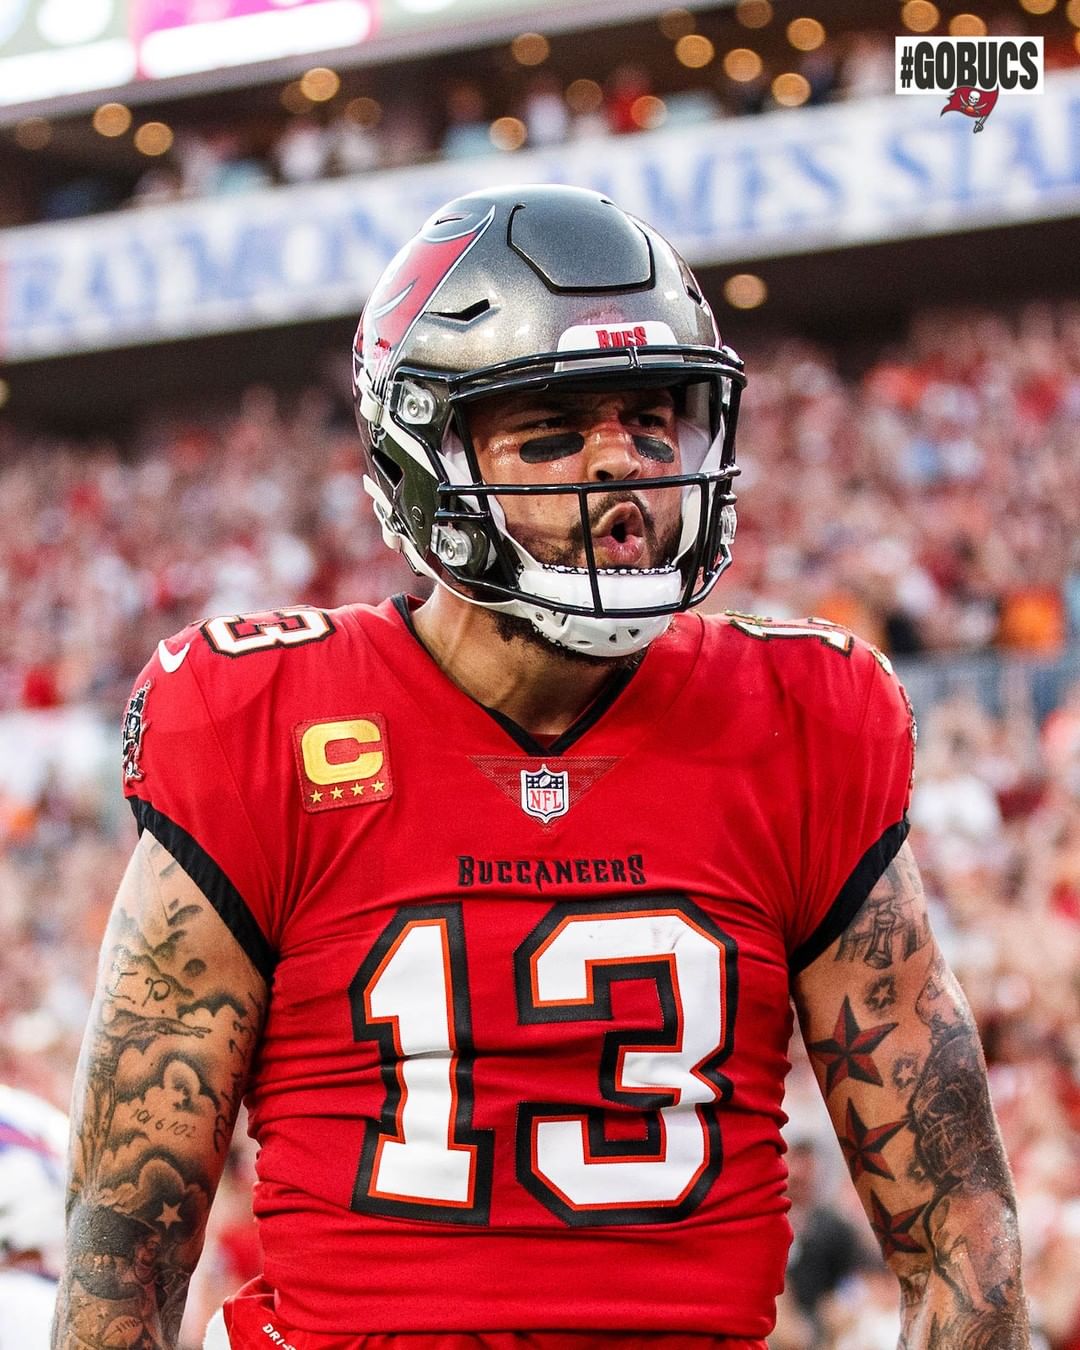 #SlowMoSaturday  @mikeevans  Watch more highlights on Buccaneers.com....